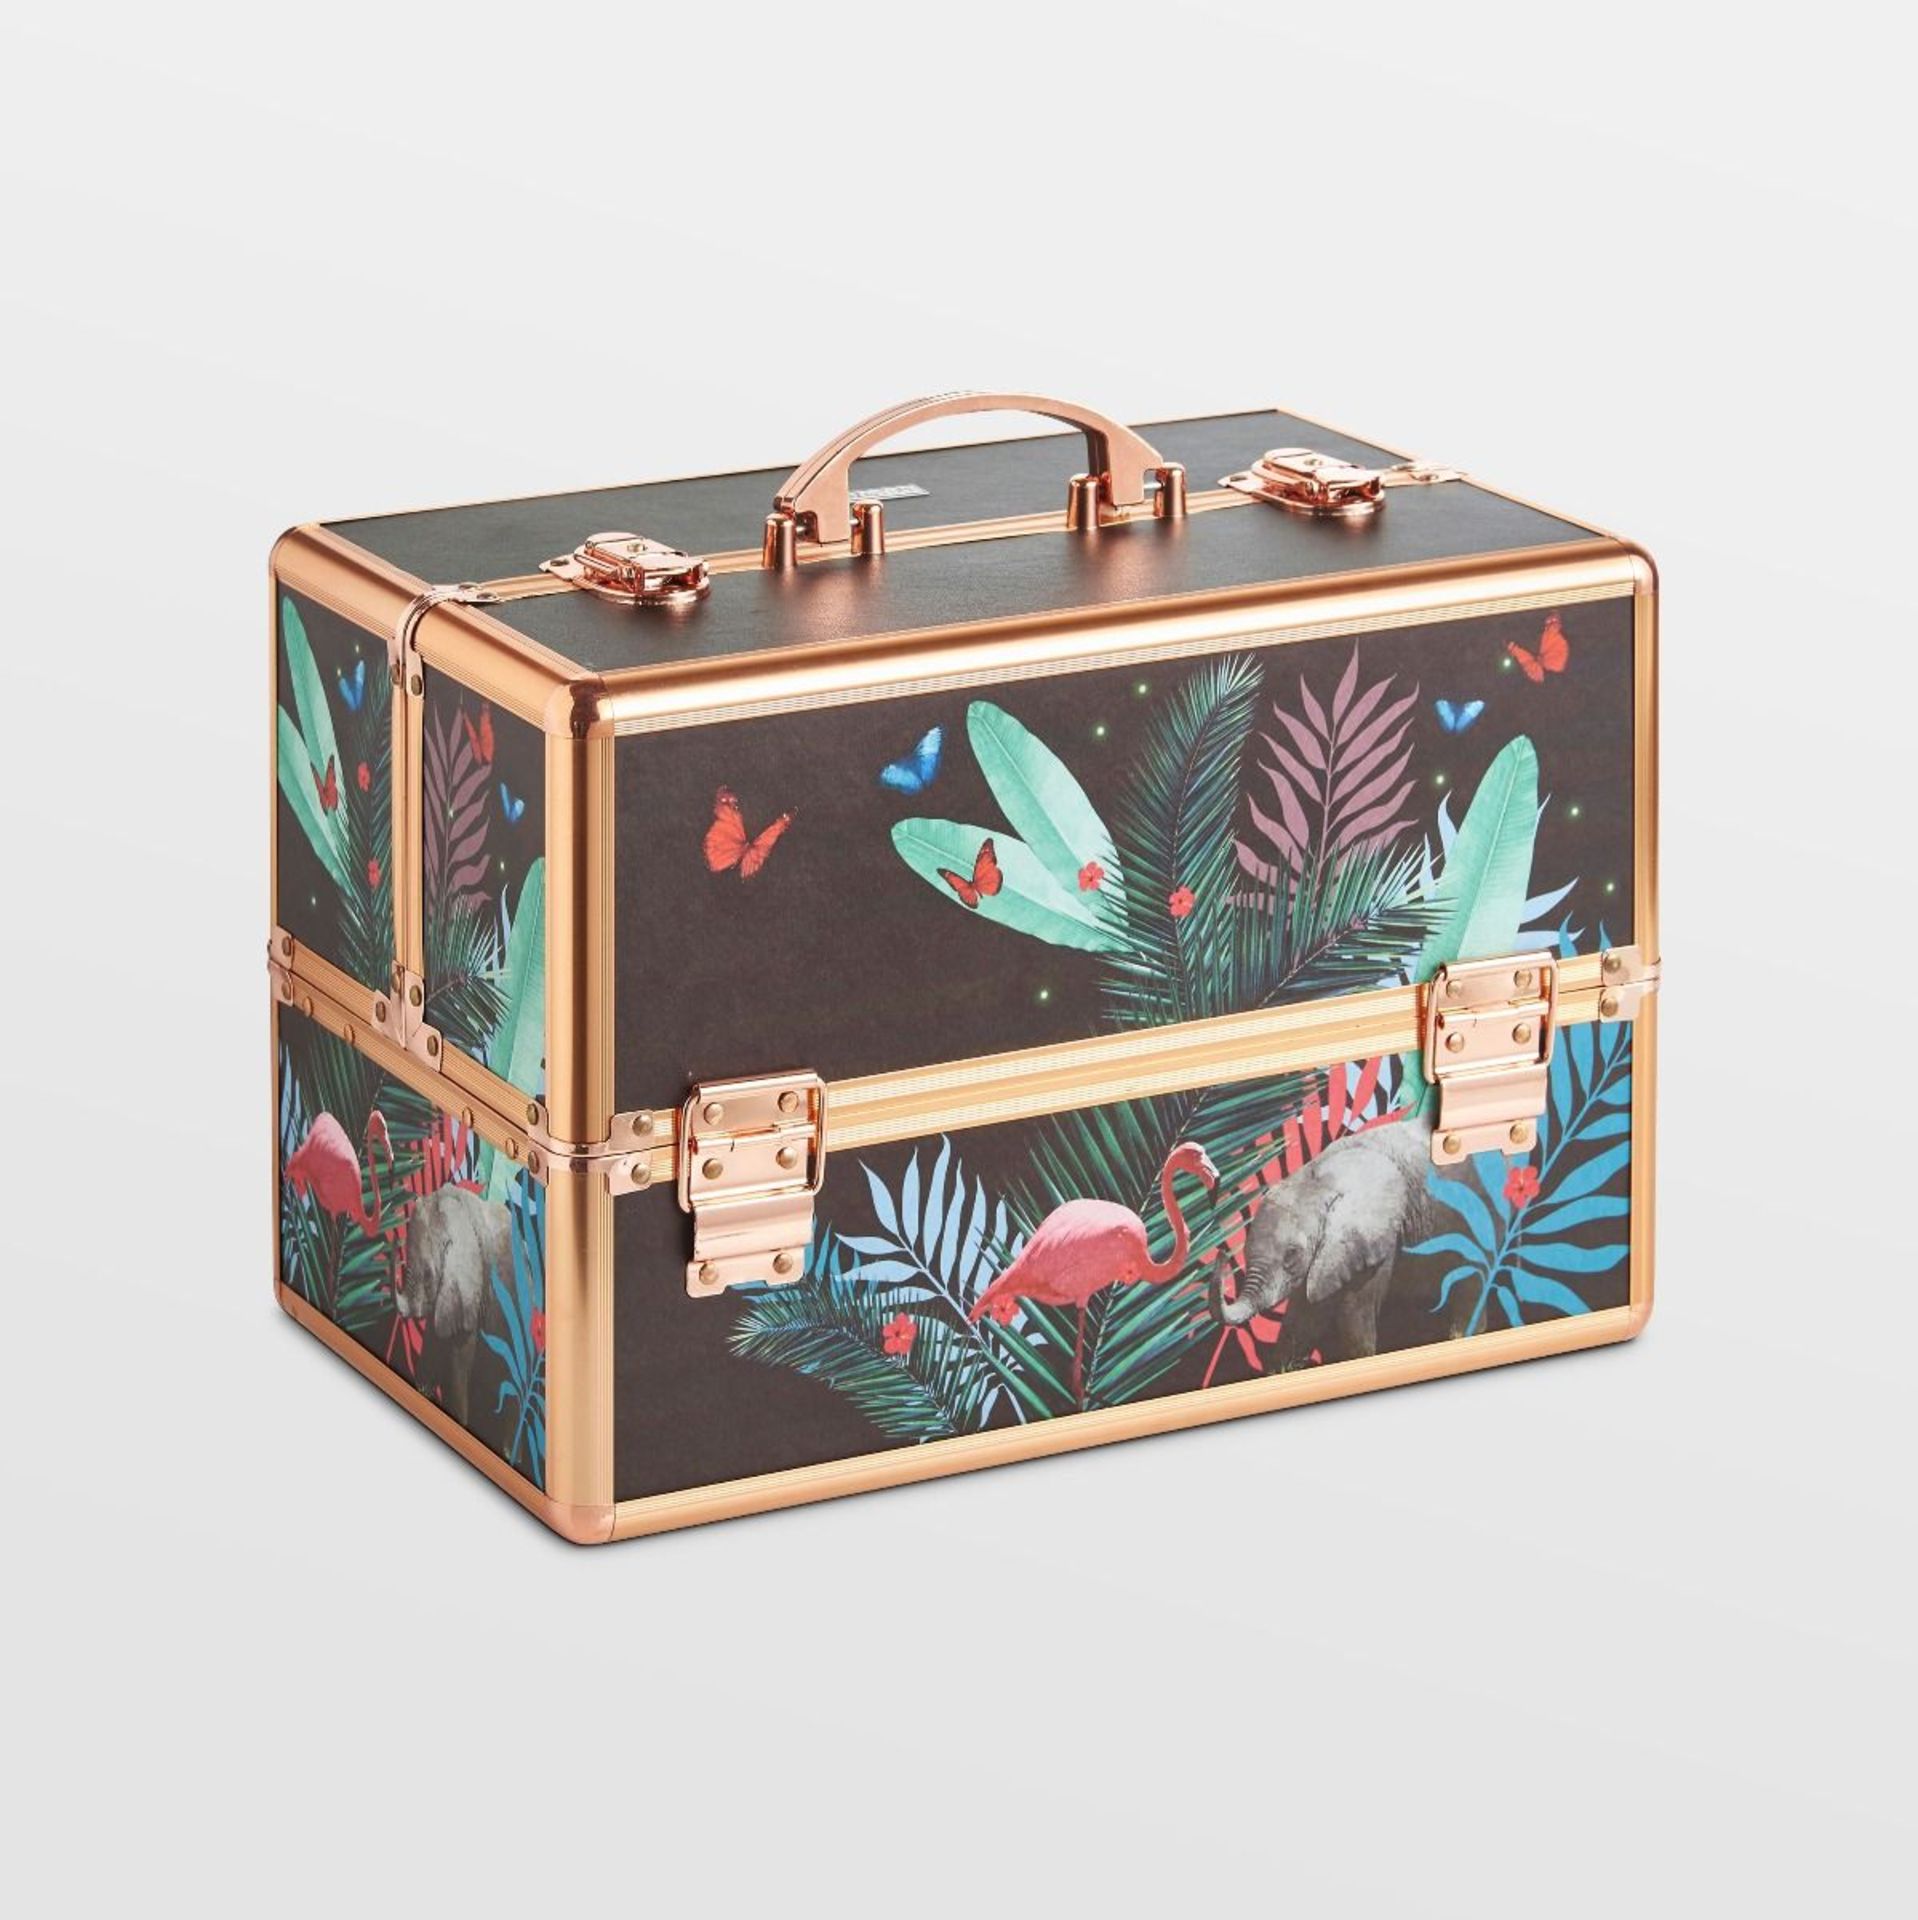 dLarge Jungle Print Makeup Case. Add a glamorous touch to beauty storage with the Beautify Jungle